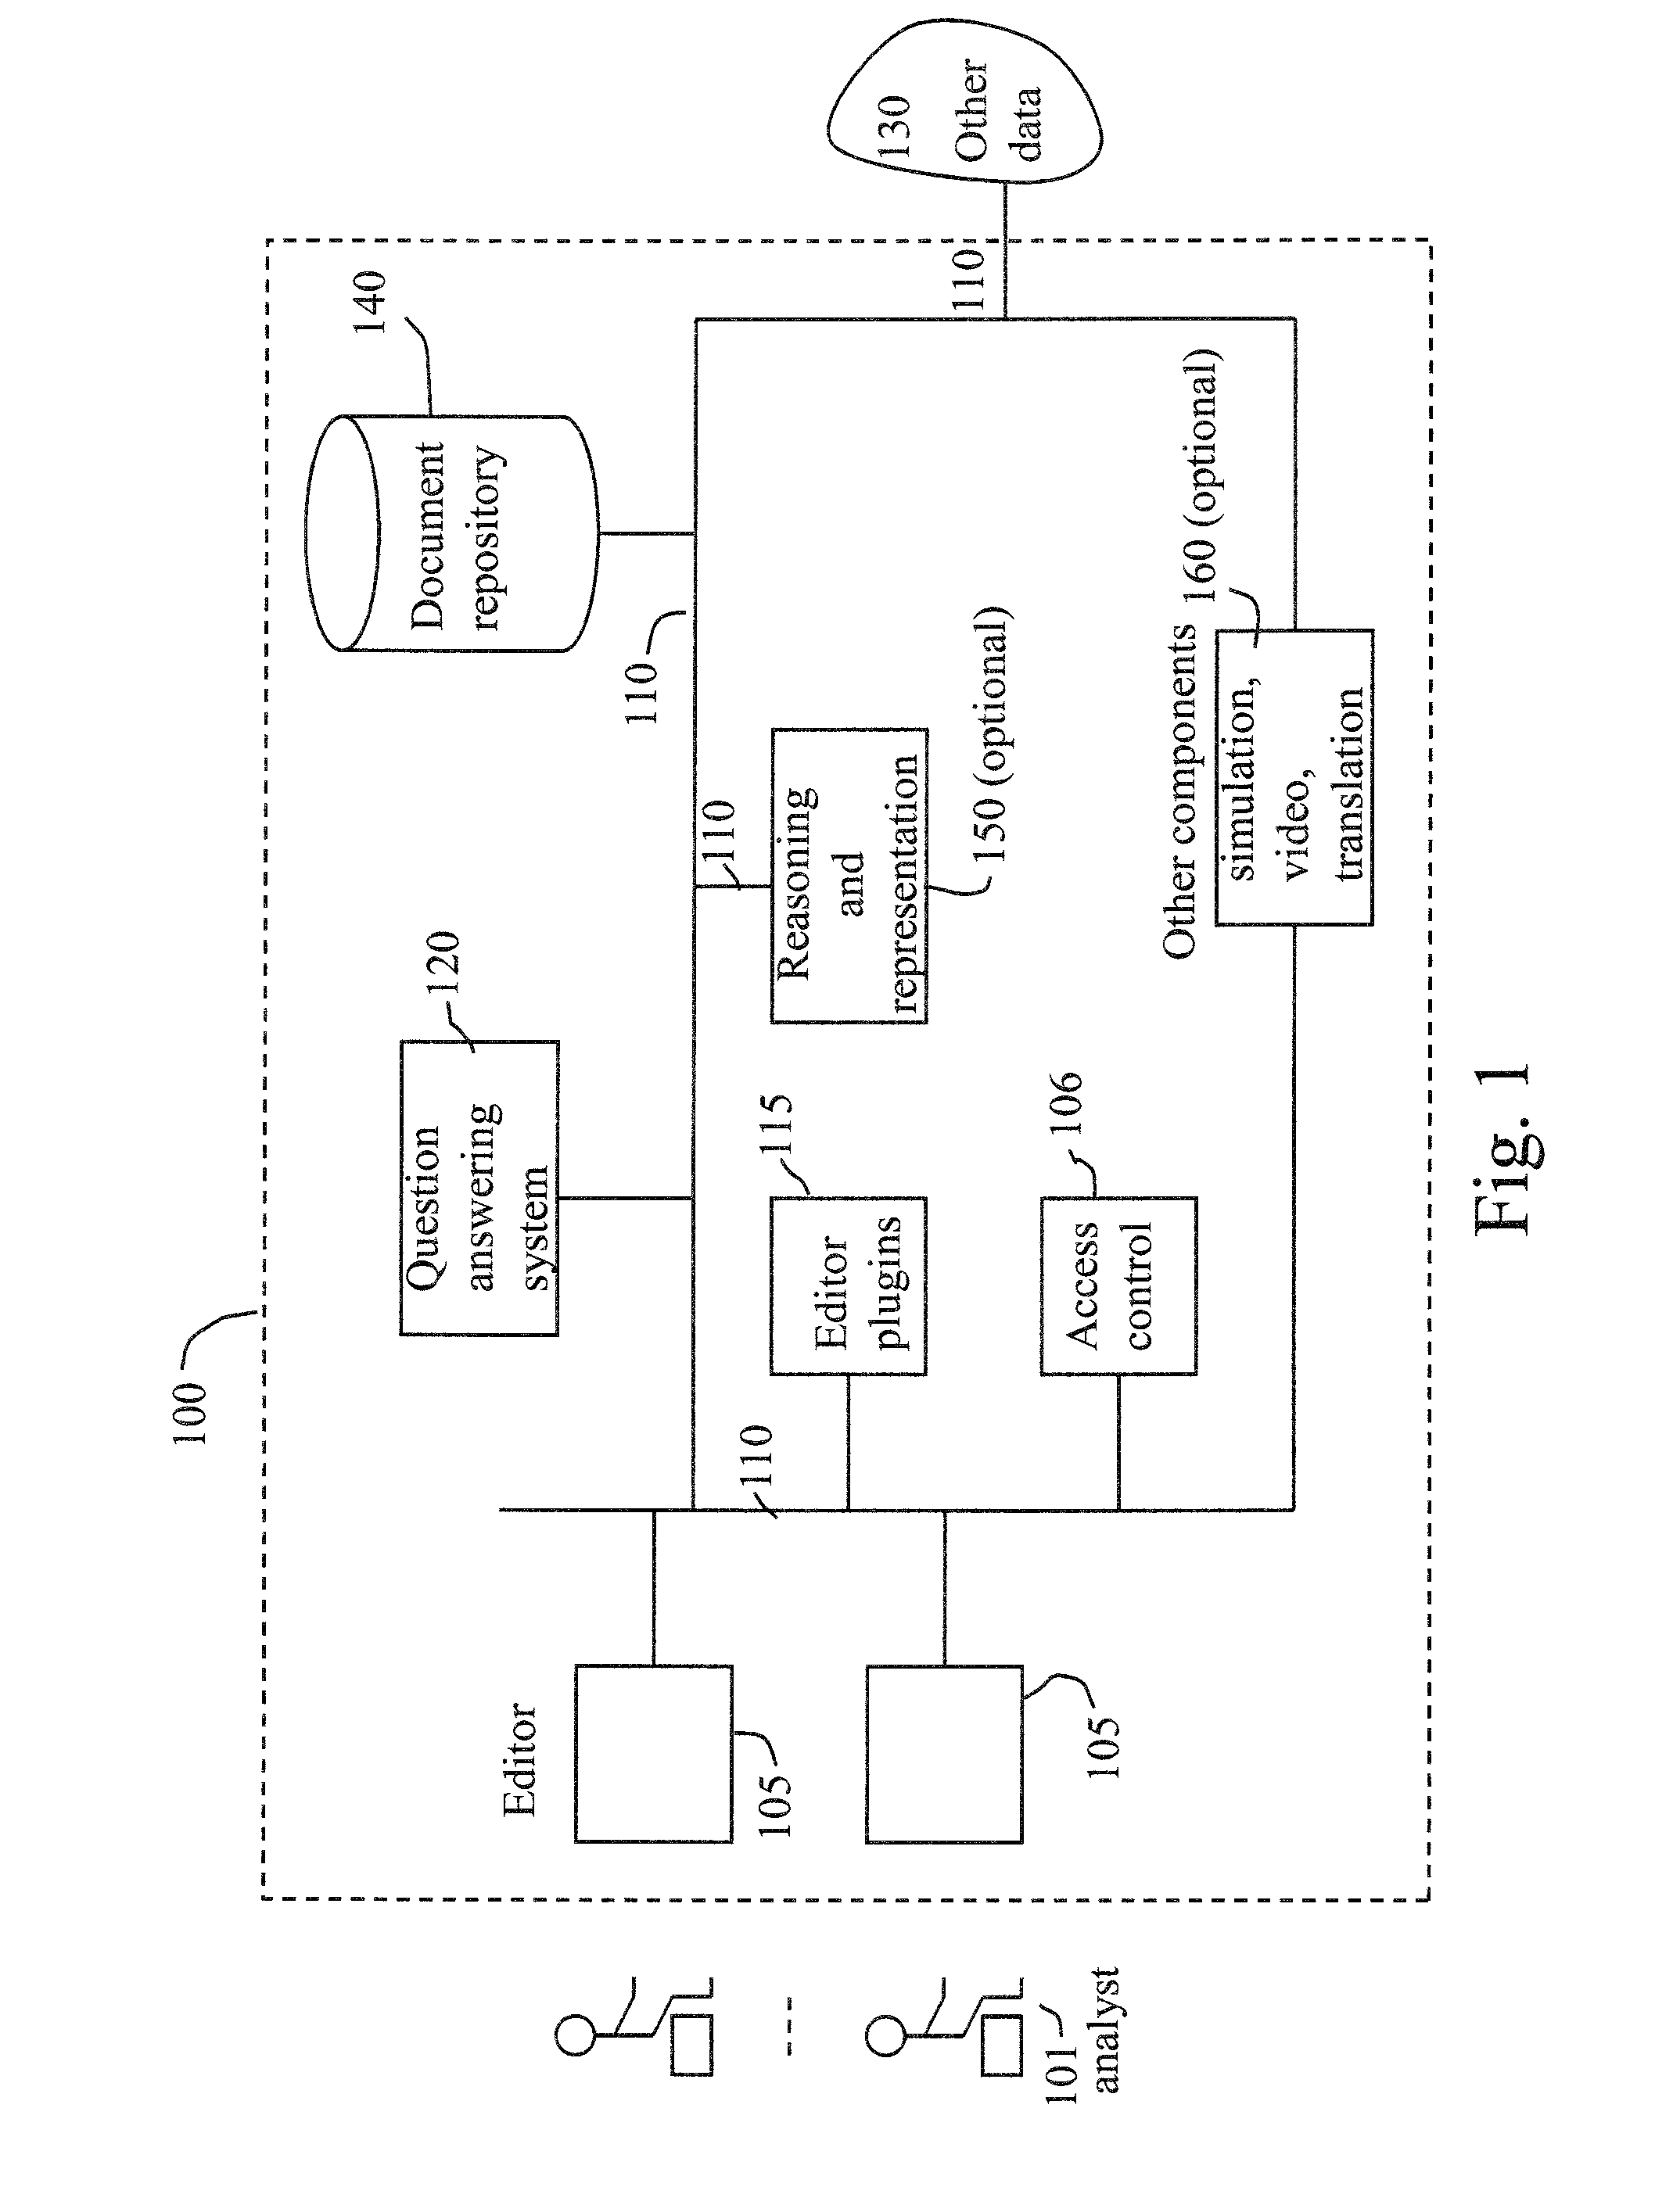 Evidence evaluation system and method based on question answering